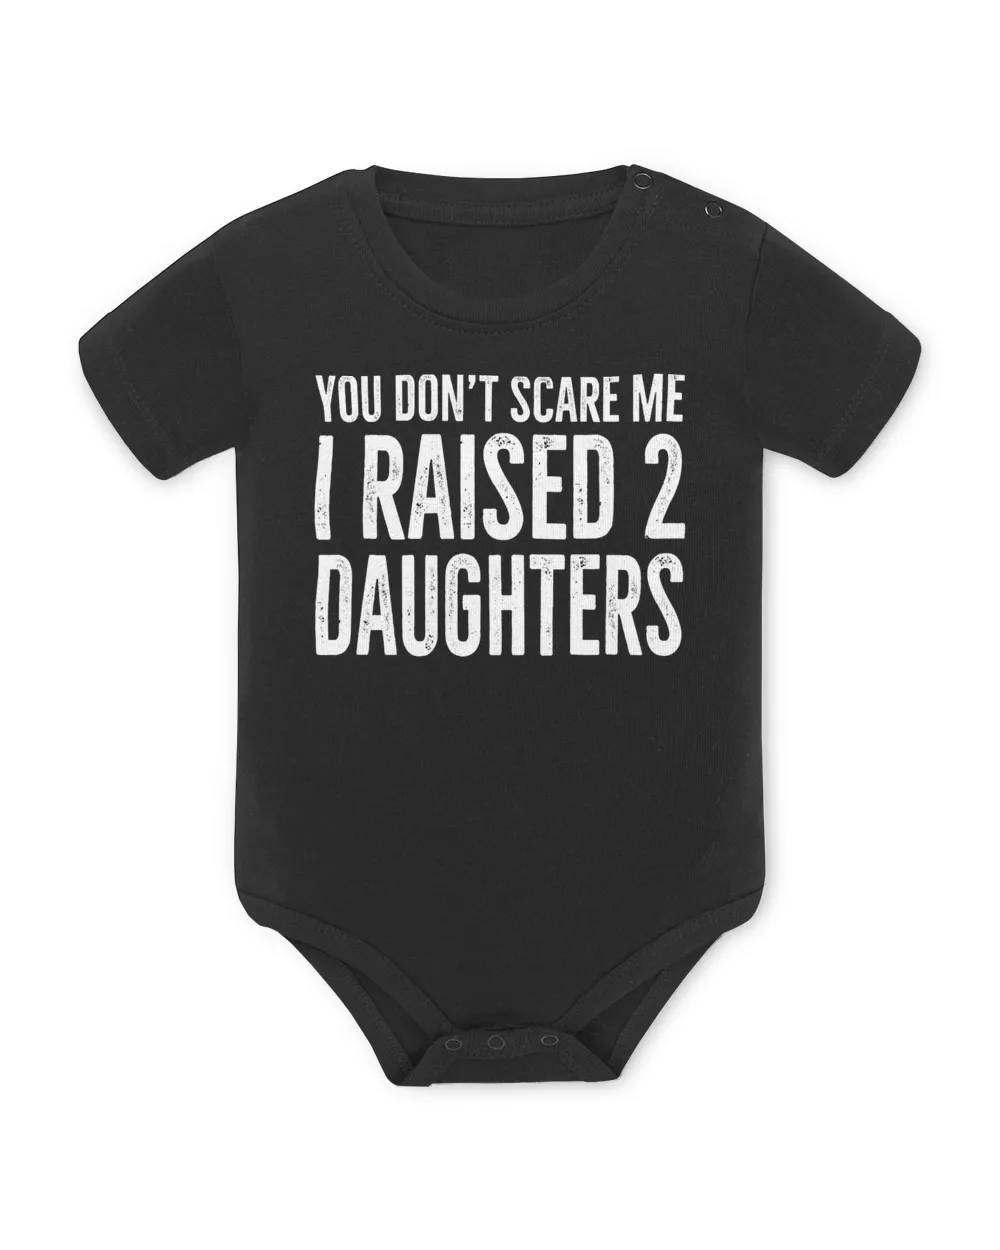 You Don't Scare Me I Raised 2 Daughters Funny T-Shirt